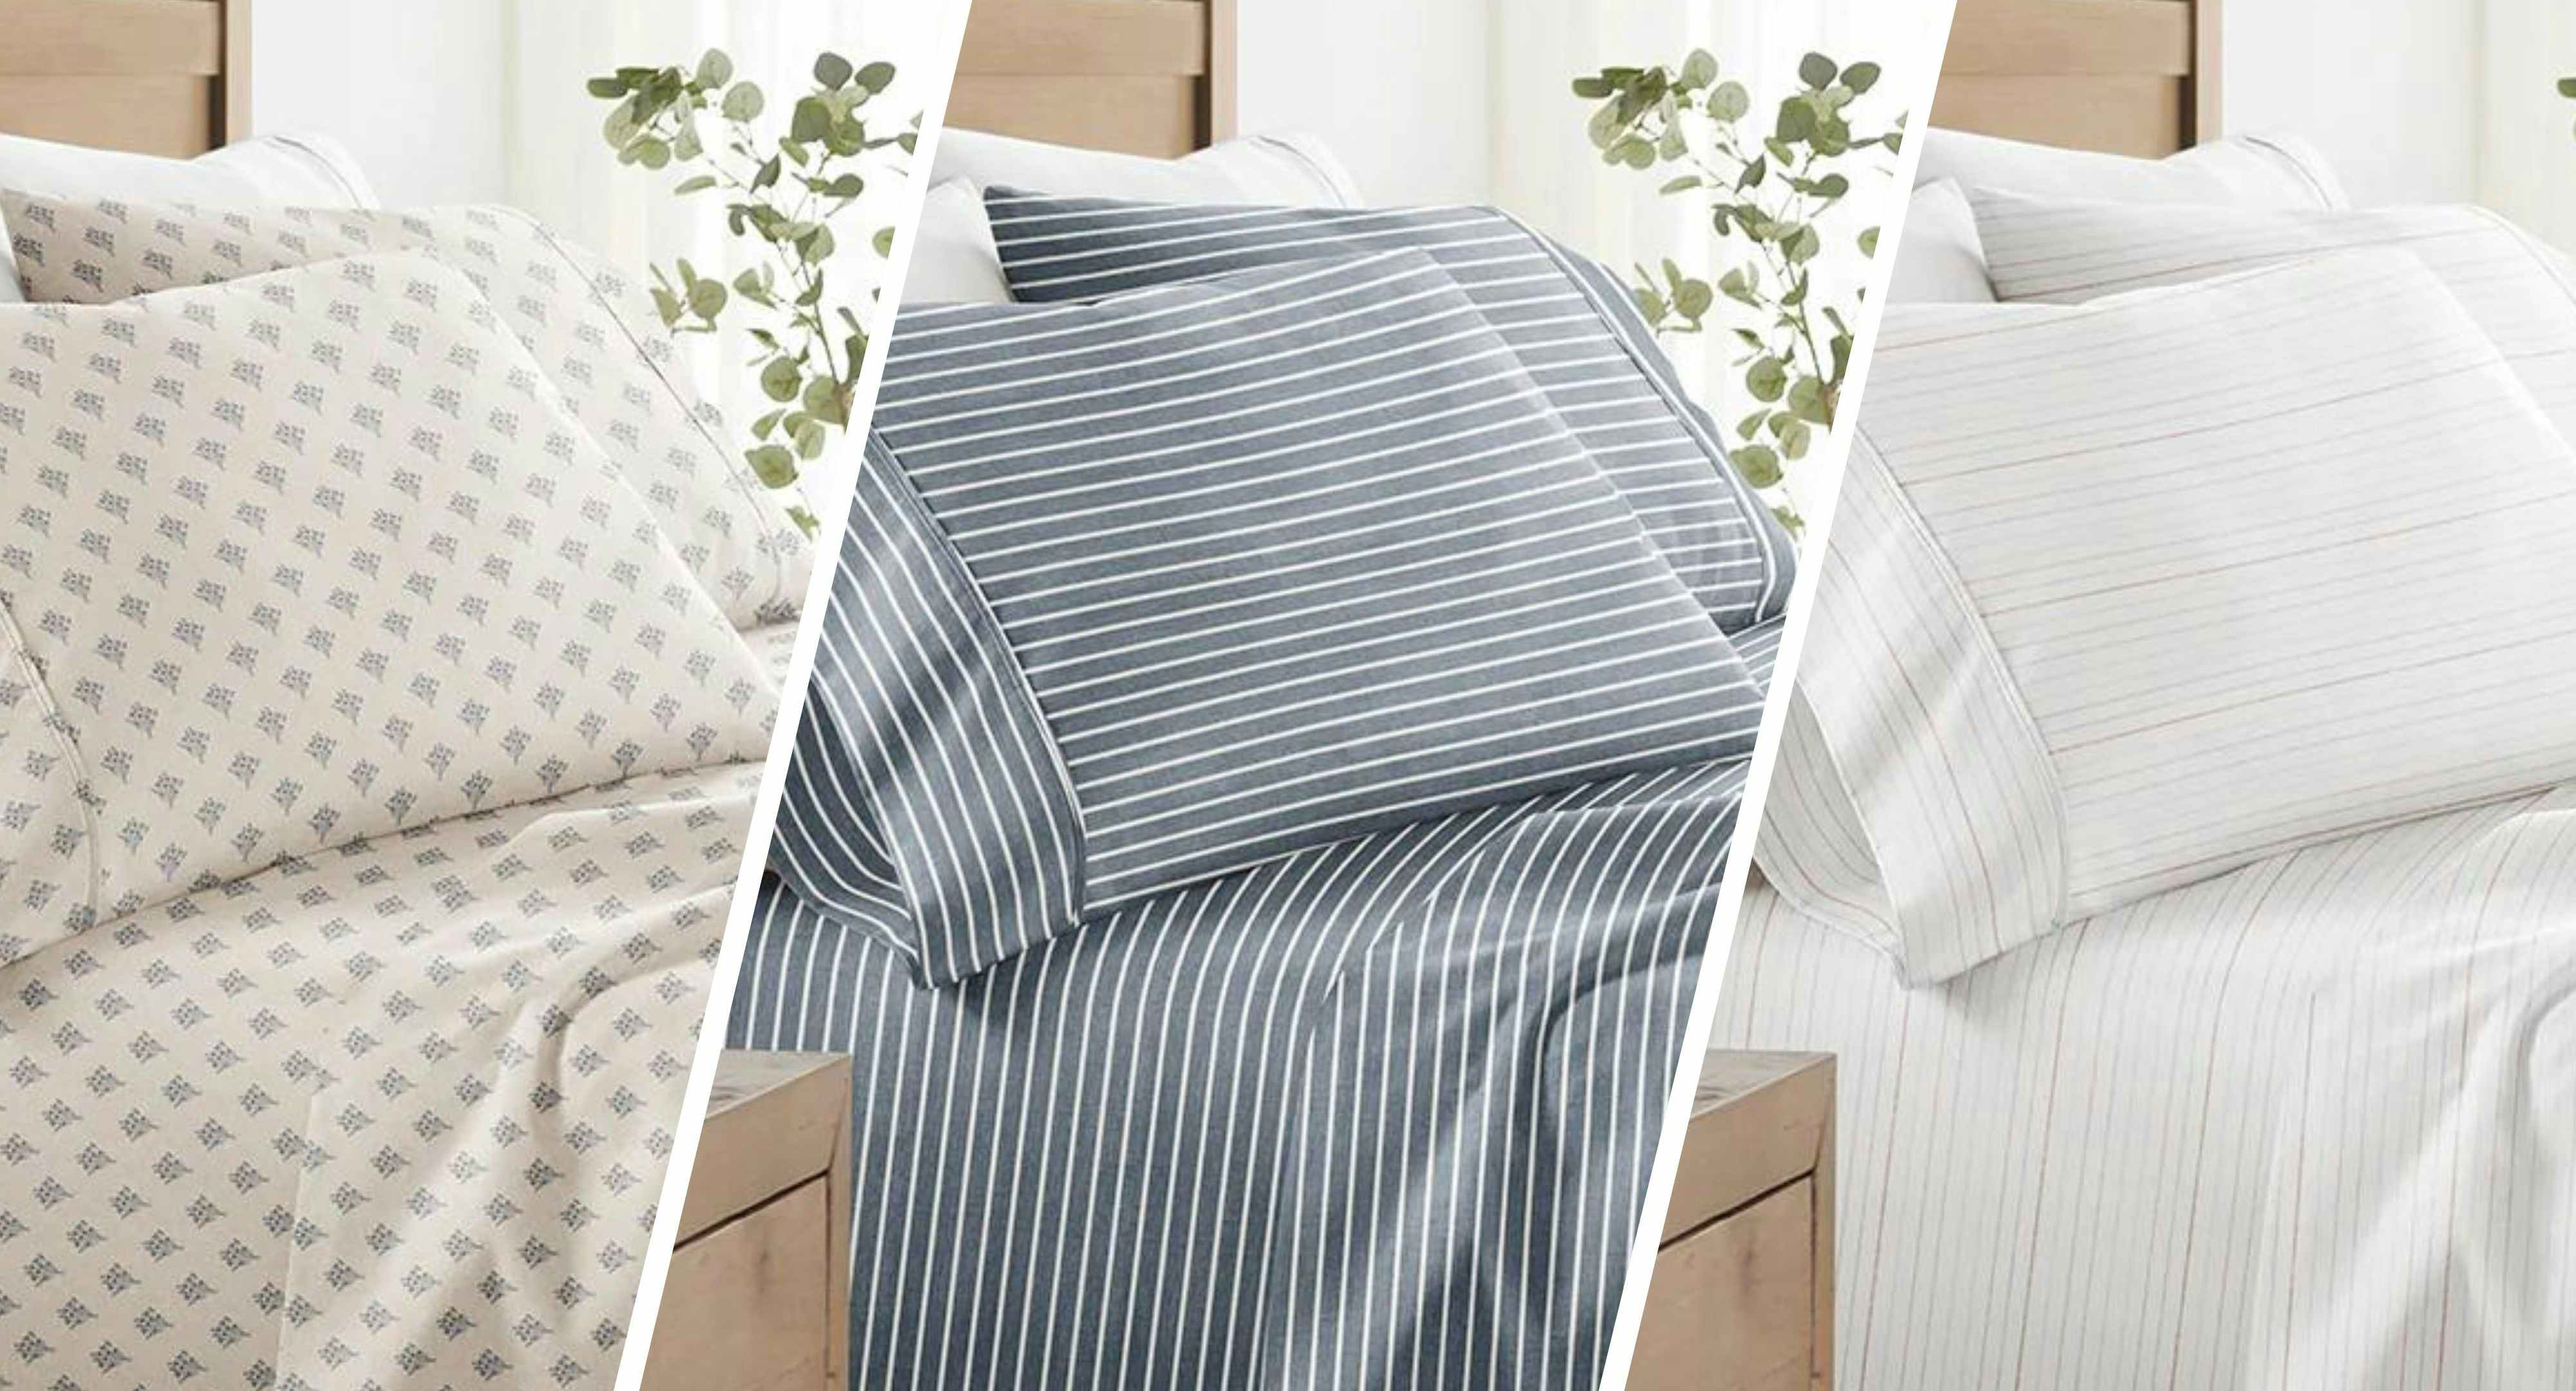 New Sheet Sets on Sale at Linens & Hutch: Prices Start at $25 Shipped